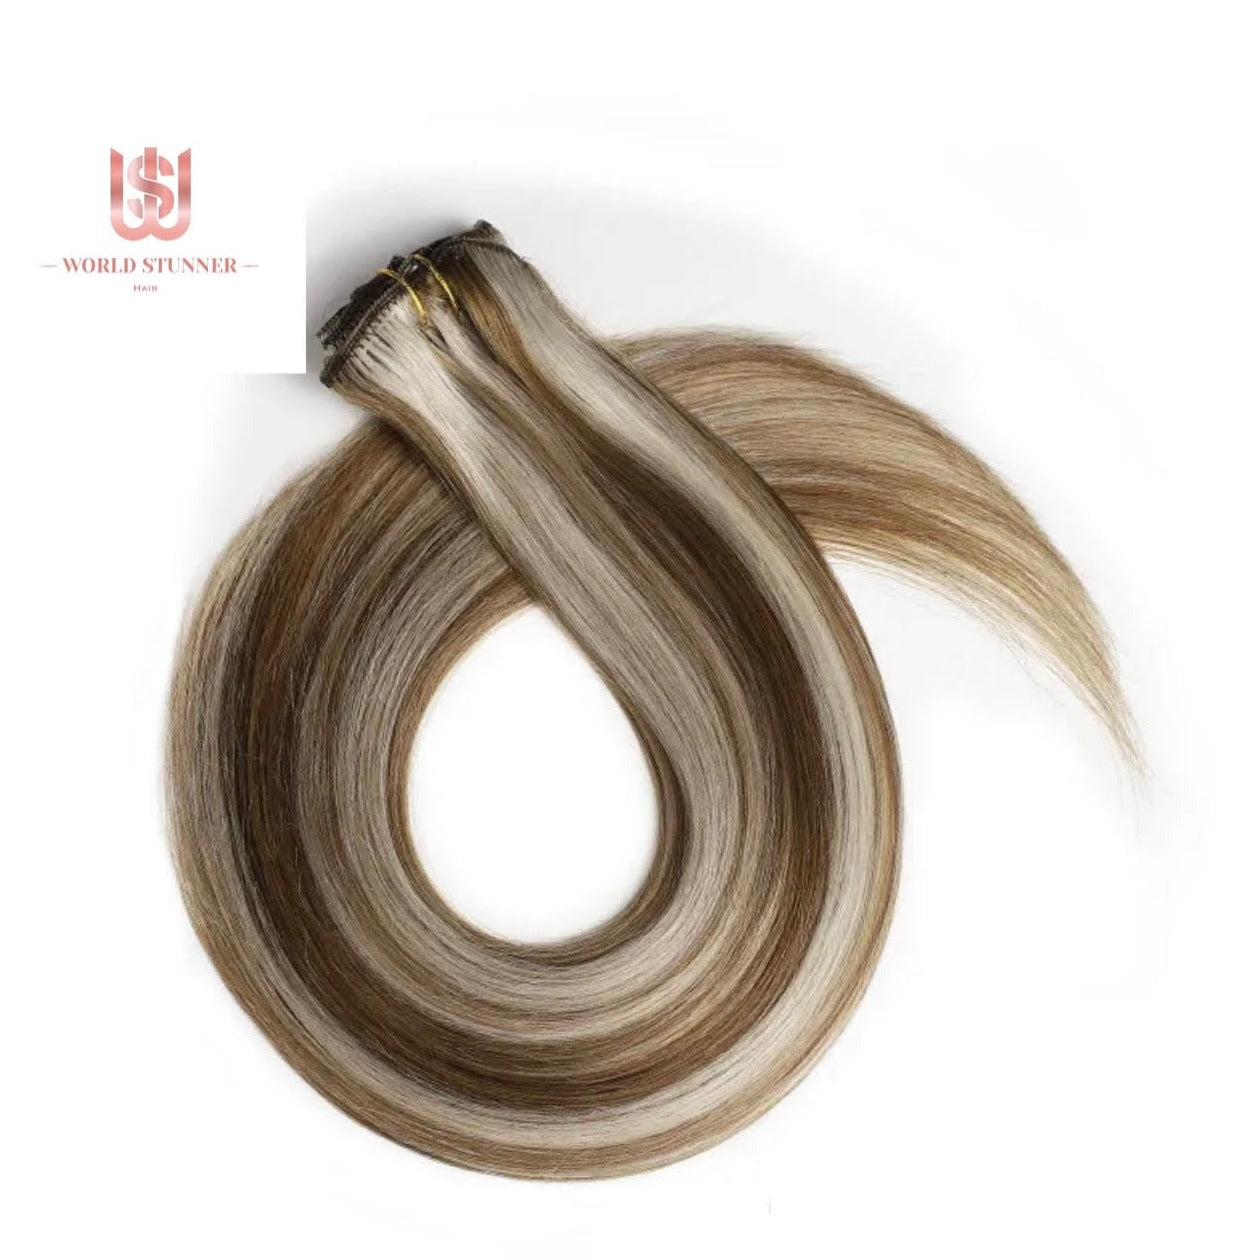 12AH60A - SUPER THICK 22” 7 PIECE STRAIGHT CLIPS IN HAIR EXTENSIONS